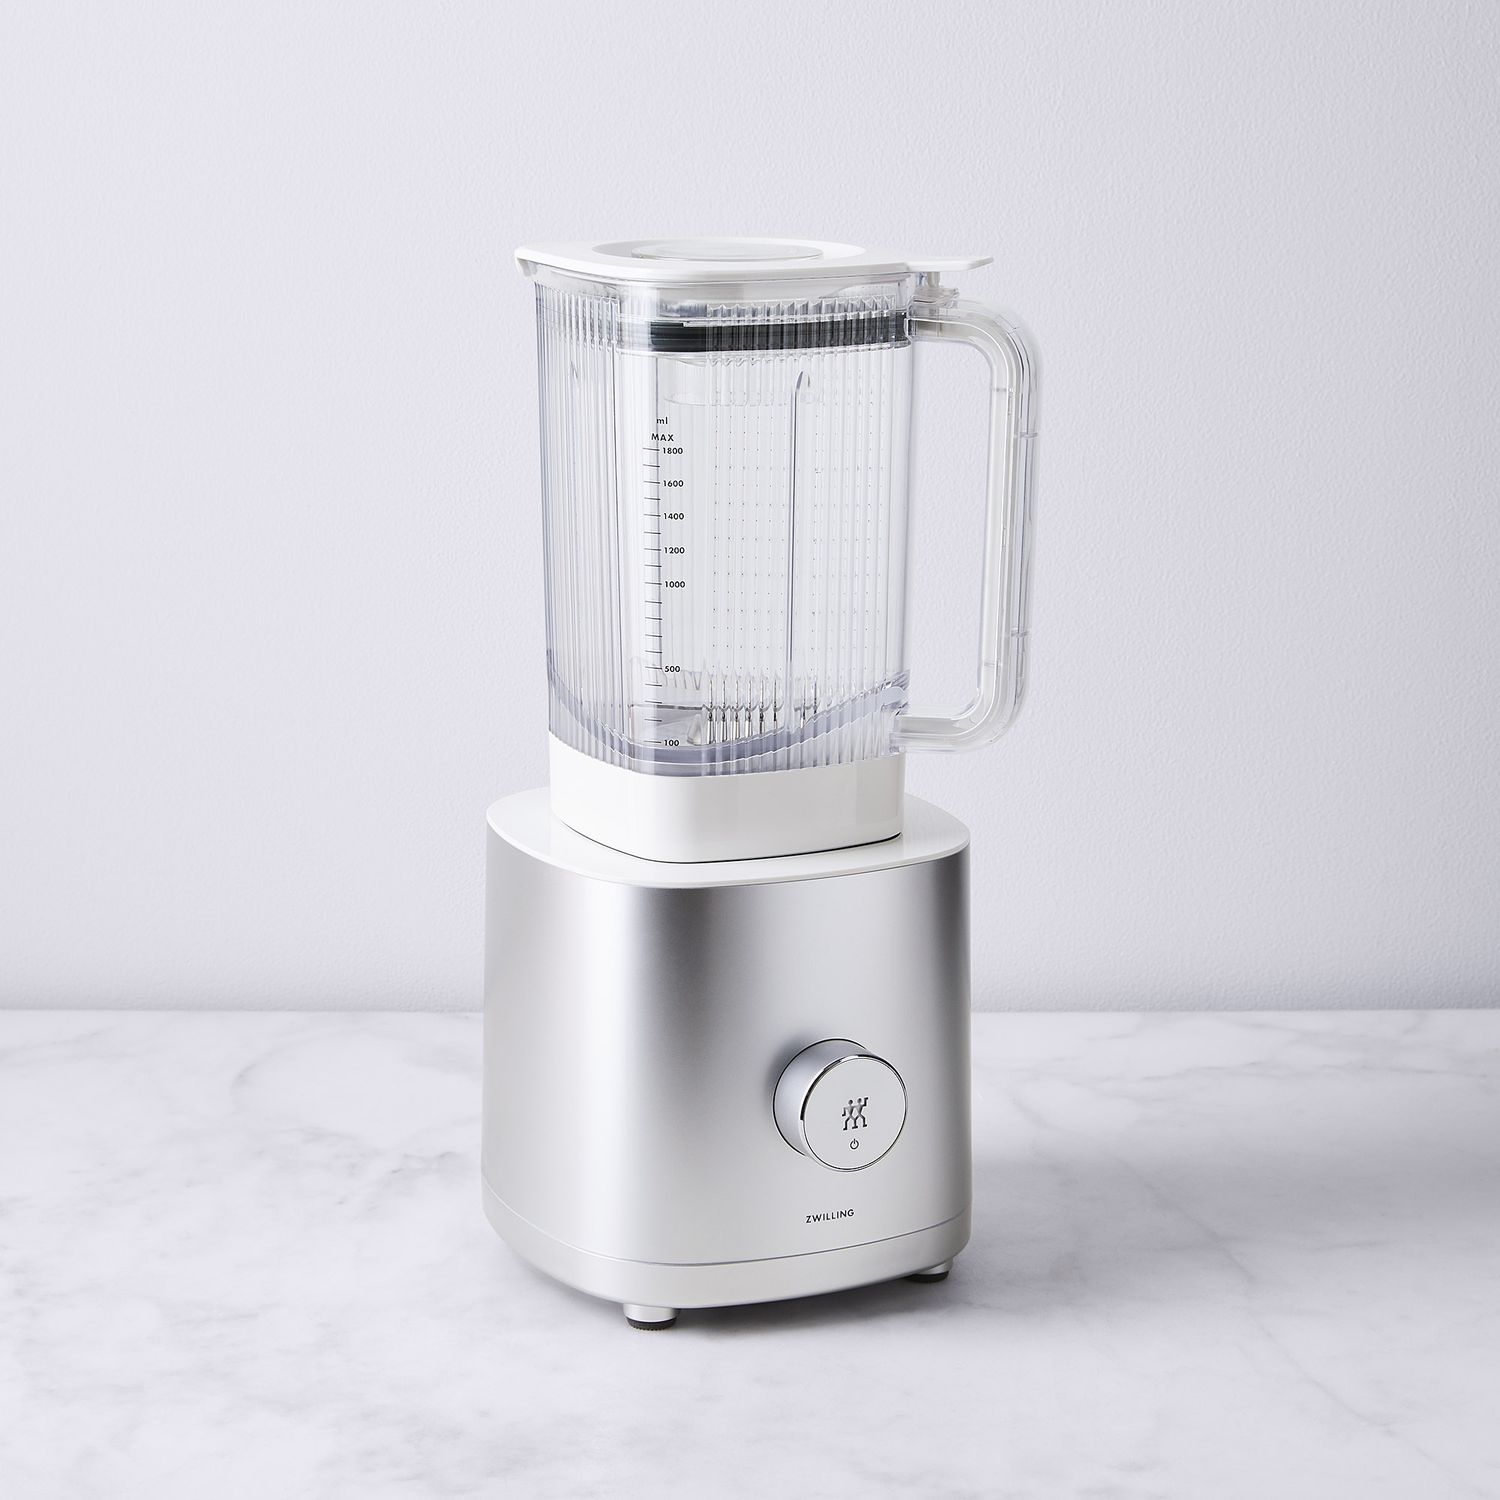 ZWILLING Customizable Coffee Bean Grinder, Black or Silver on Food52